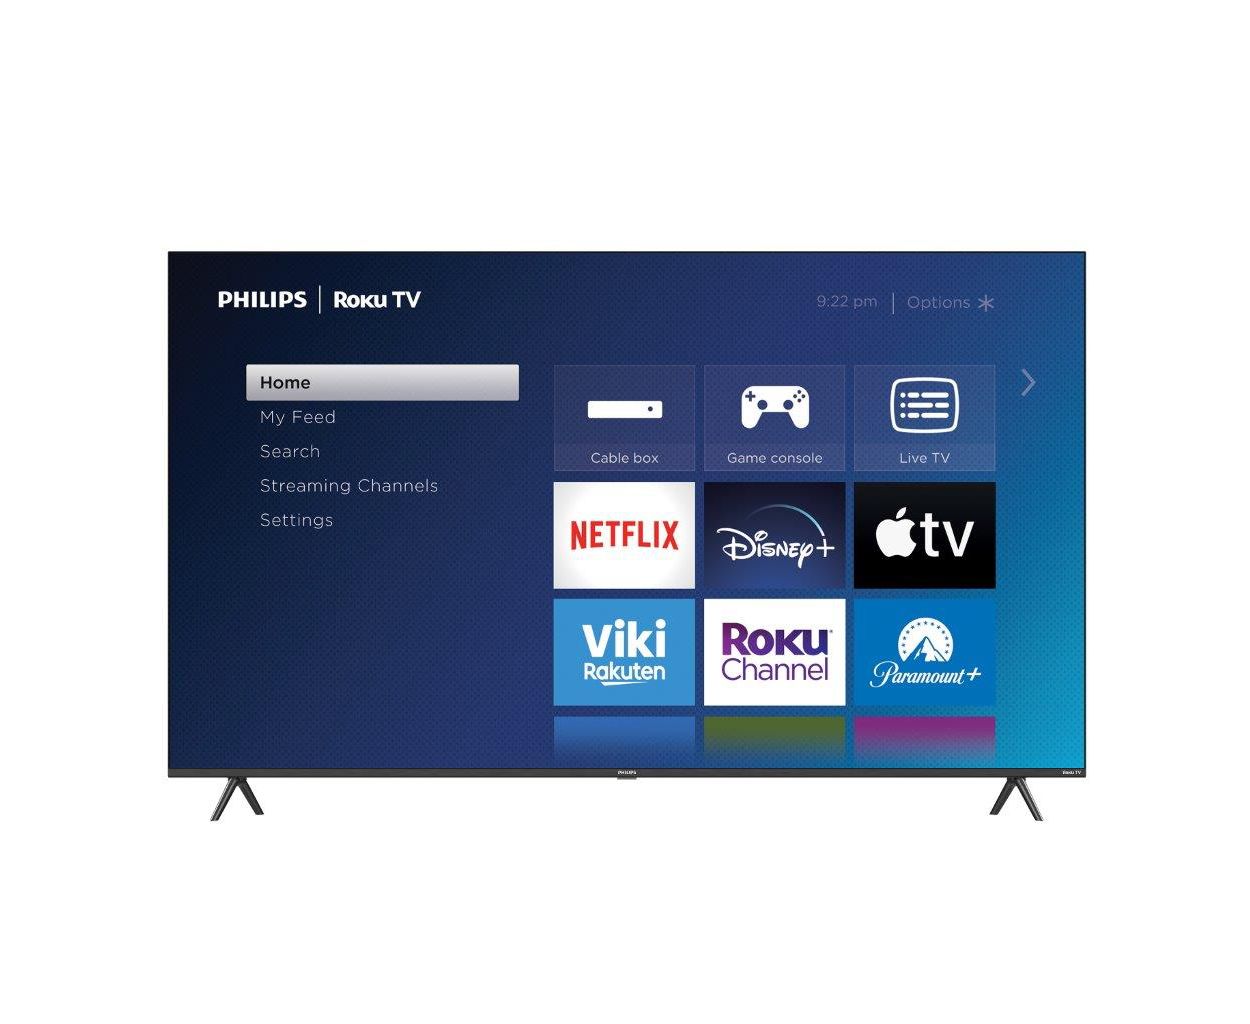 Where Are Philips TVs Made?